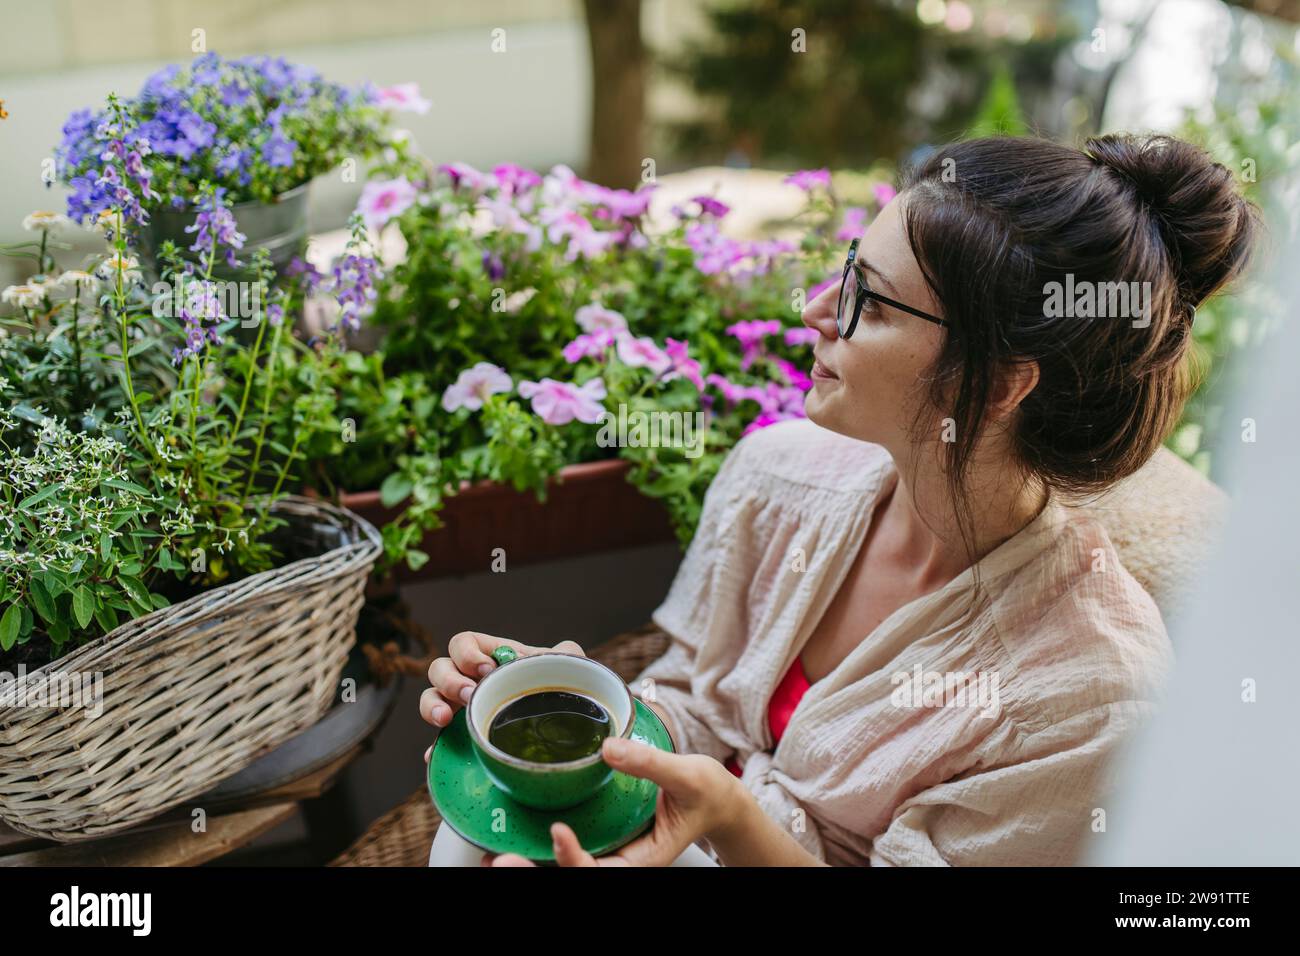 Woman enjoying her free time and a cup of coffee on the balcony Stock Photo